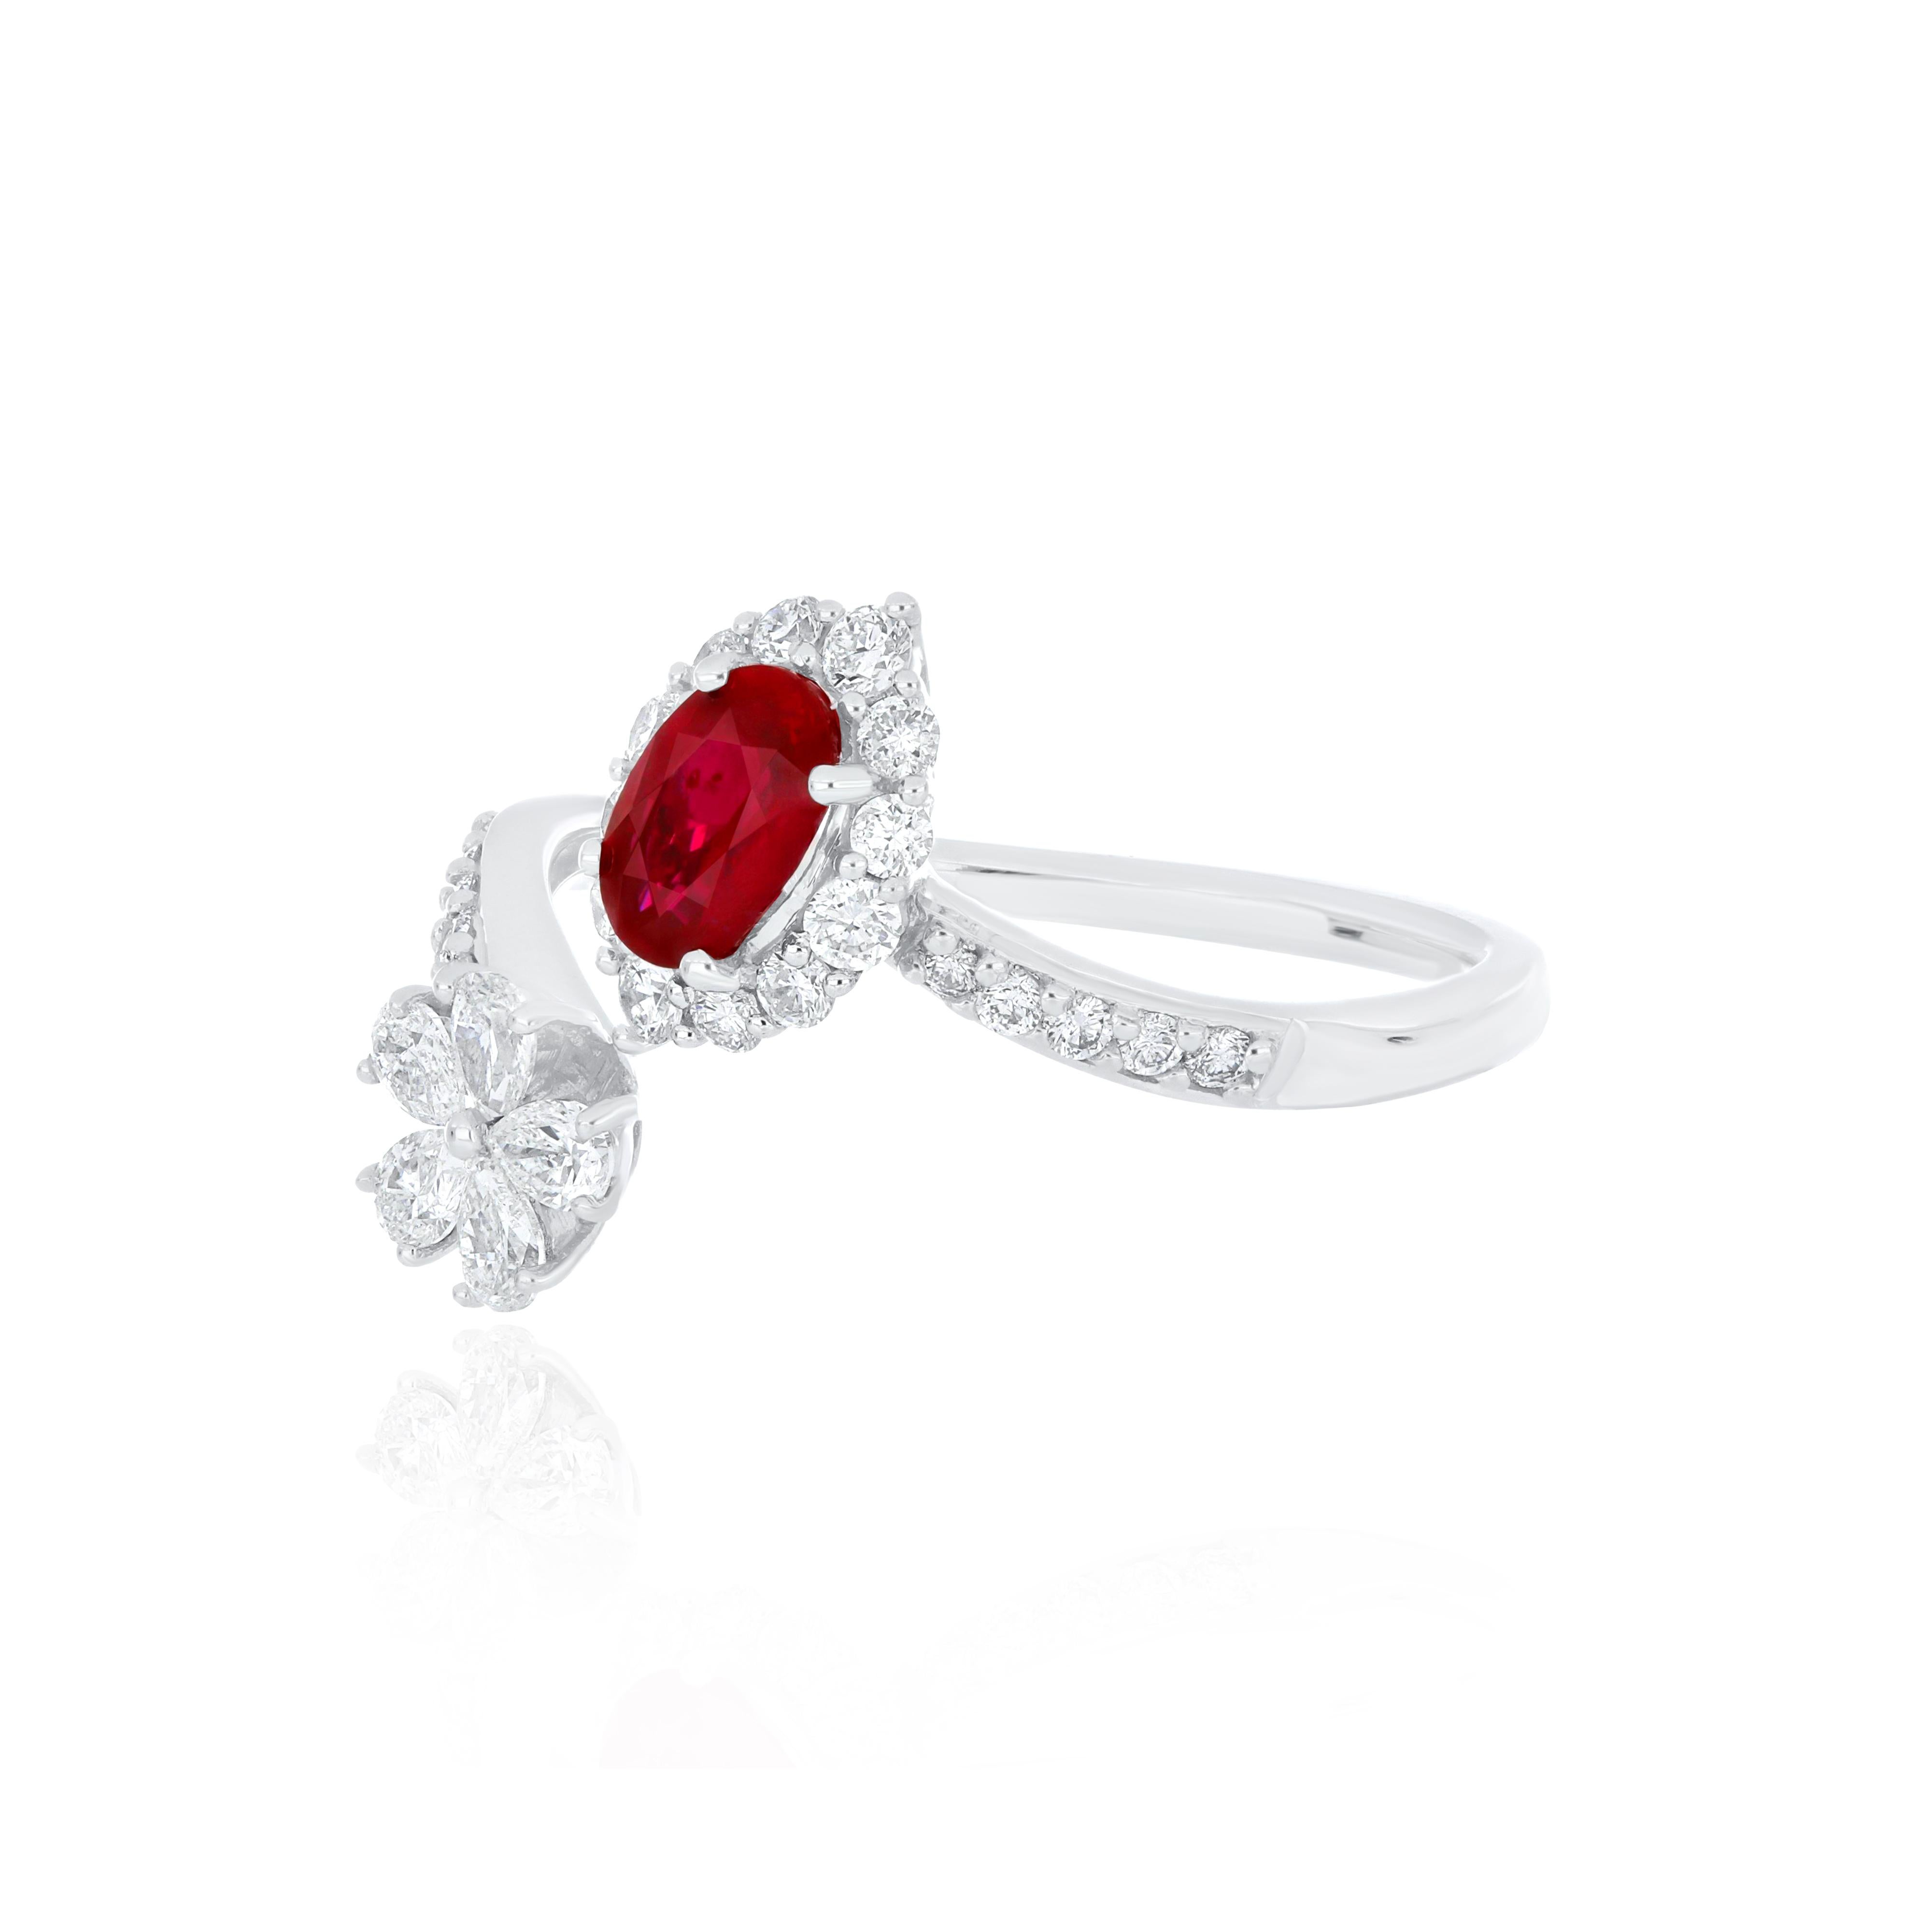 Oval Cut Ruby Mozambique And Diamond Ring 18 Karat White Gold Handcraft jewelry Ring